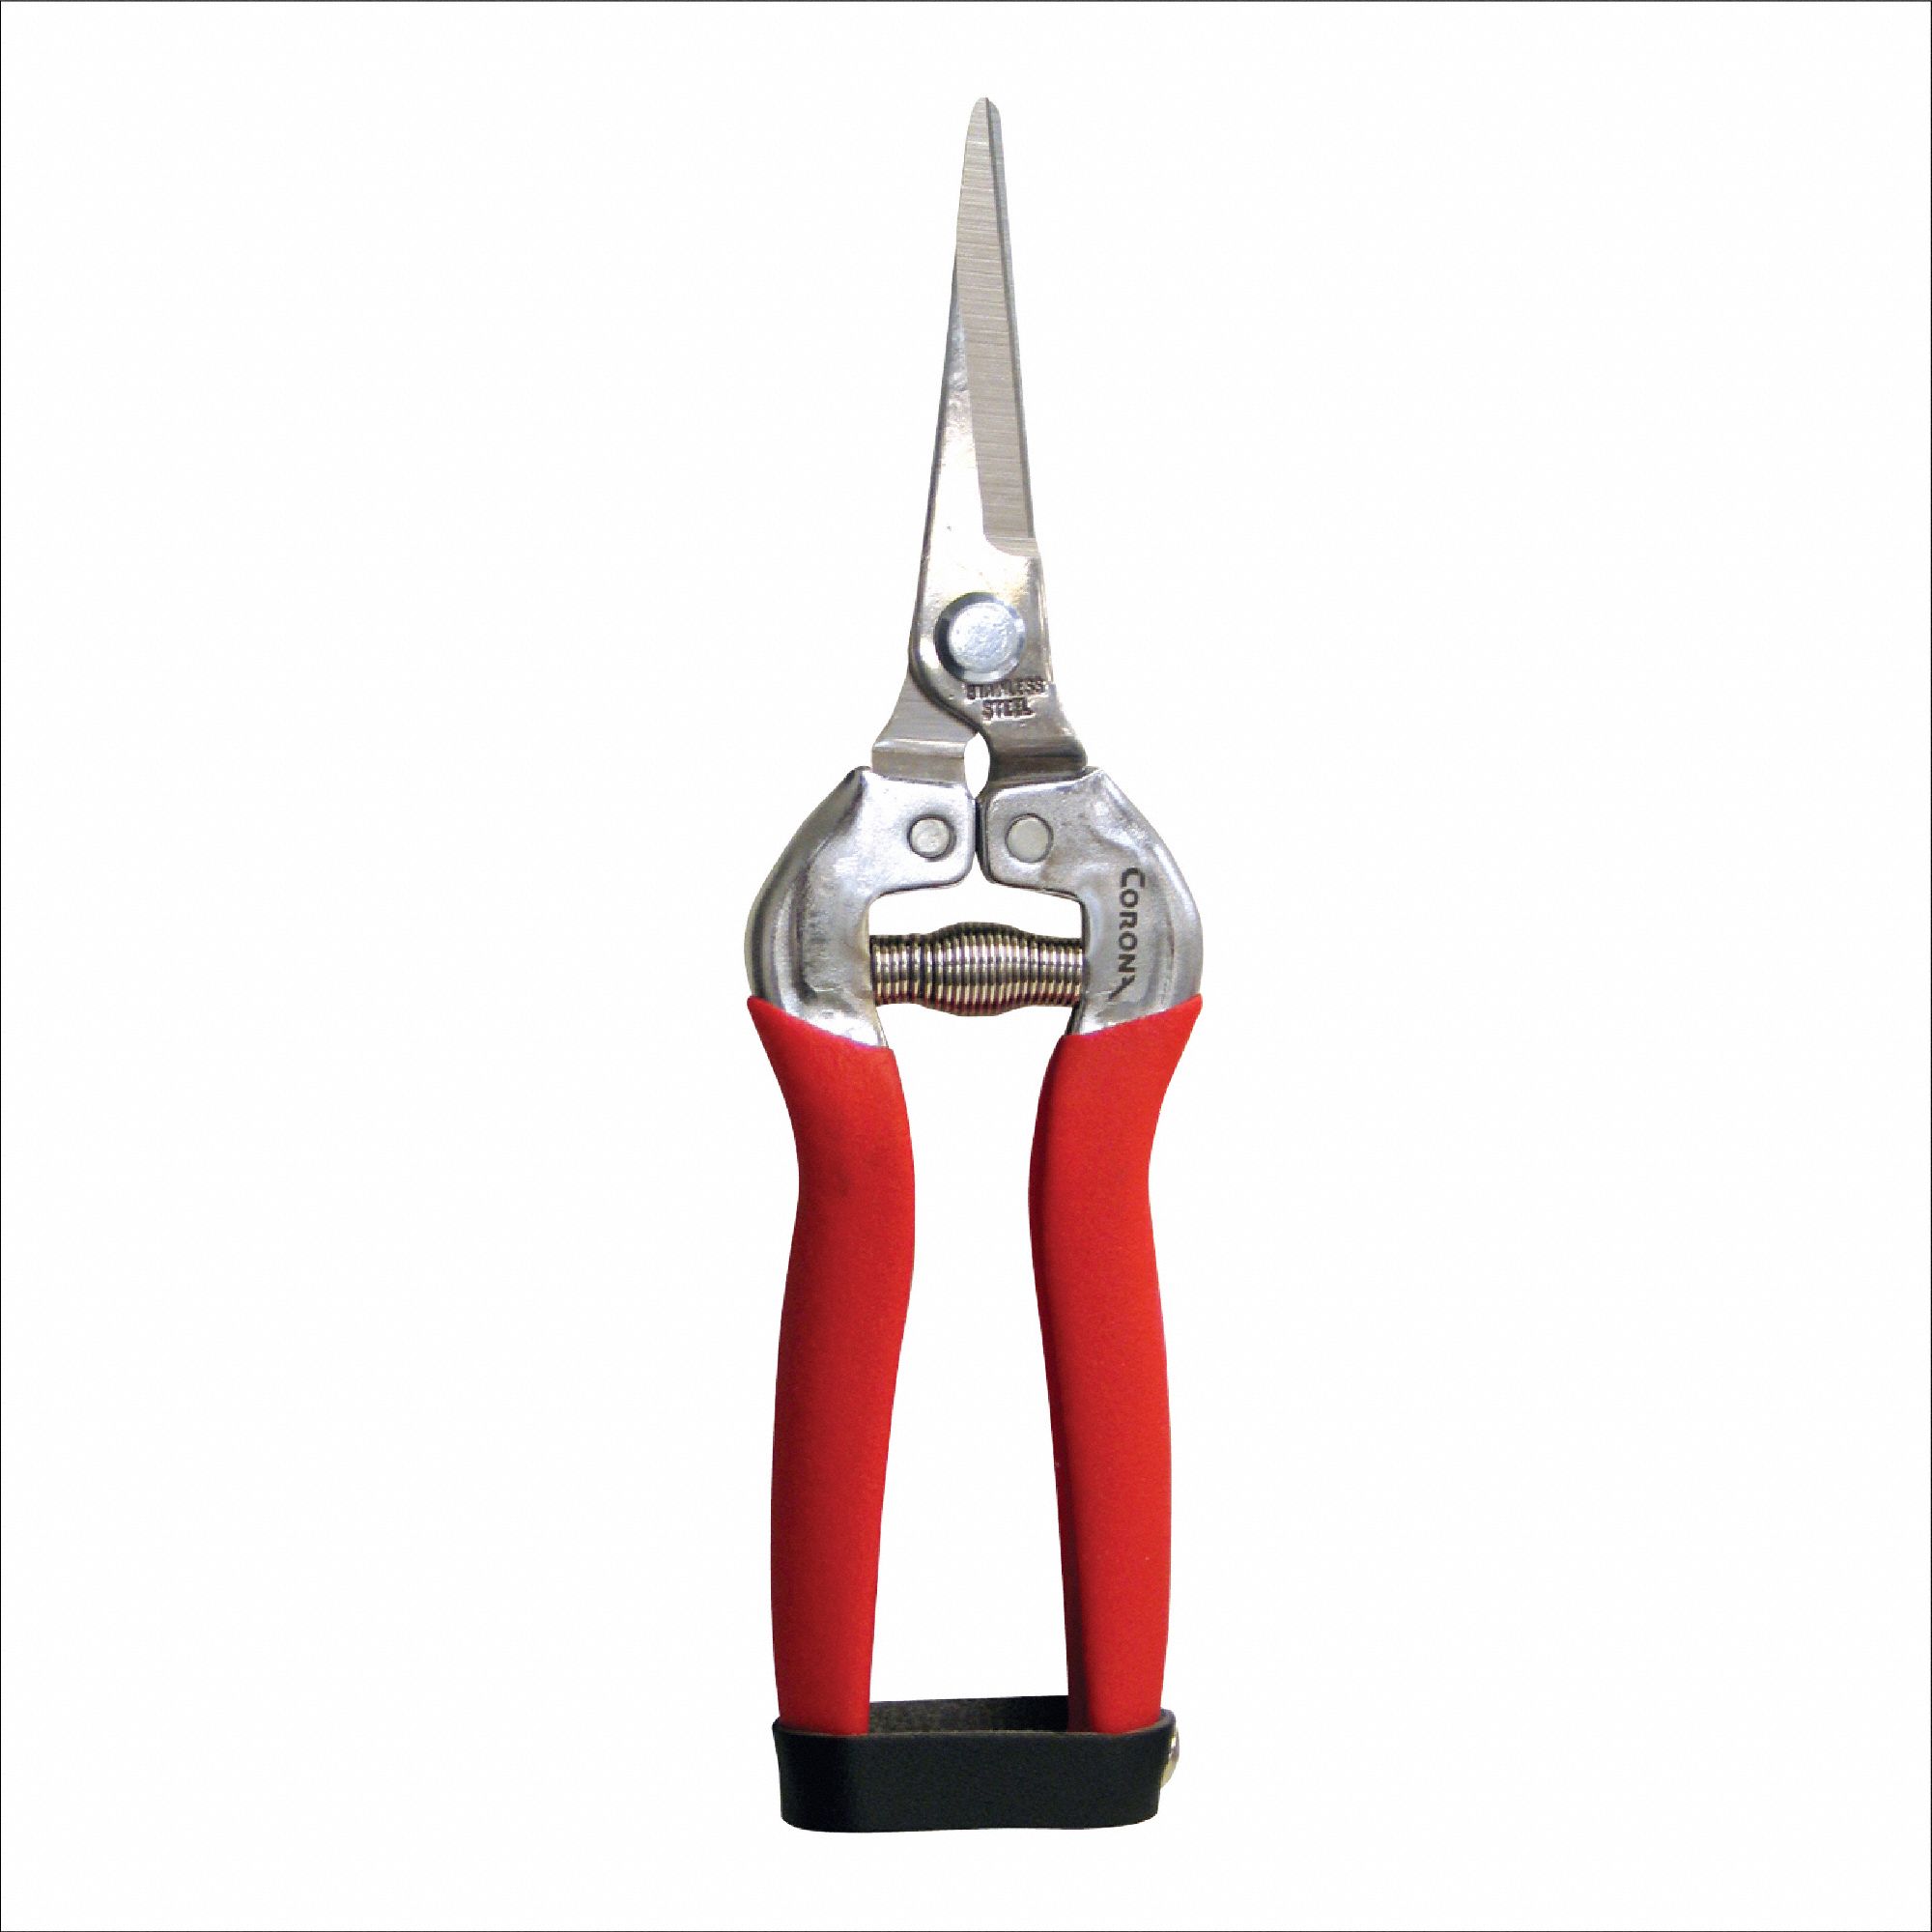 Pruner: 1 3/4 in Blade Lg, 7 1/2 in Overall Lg, 3/8 in, Stainless Steel, Metal